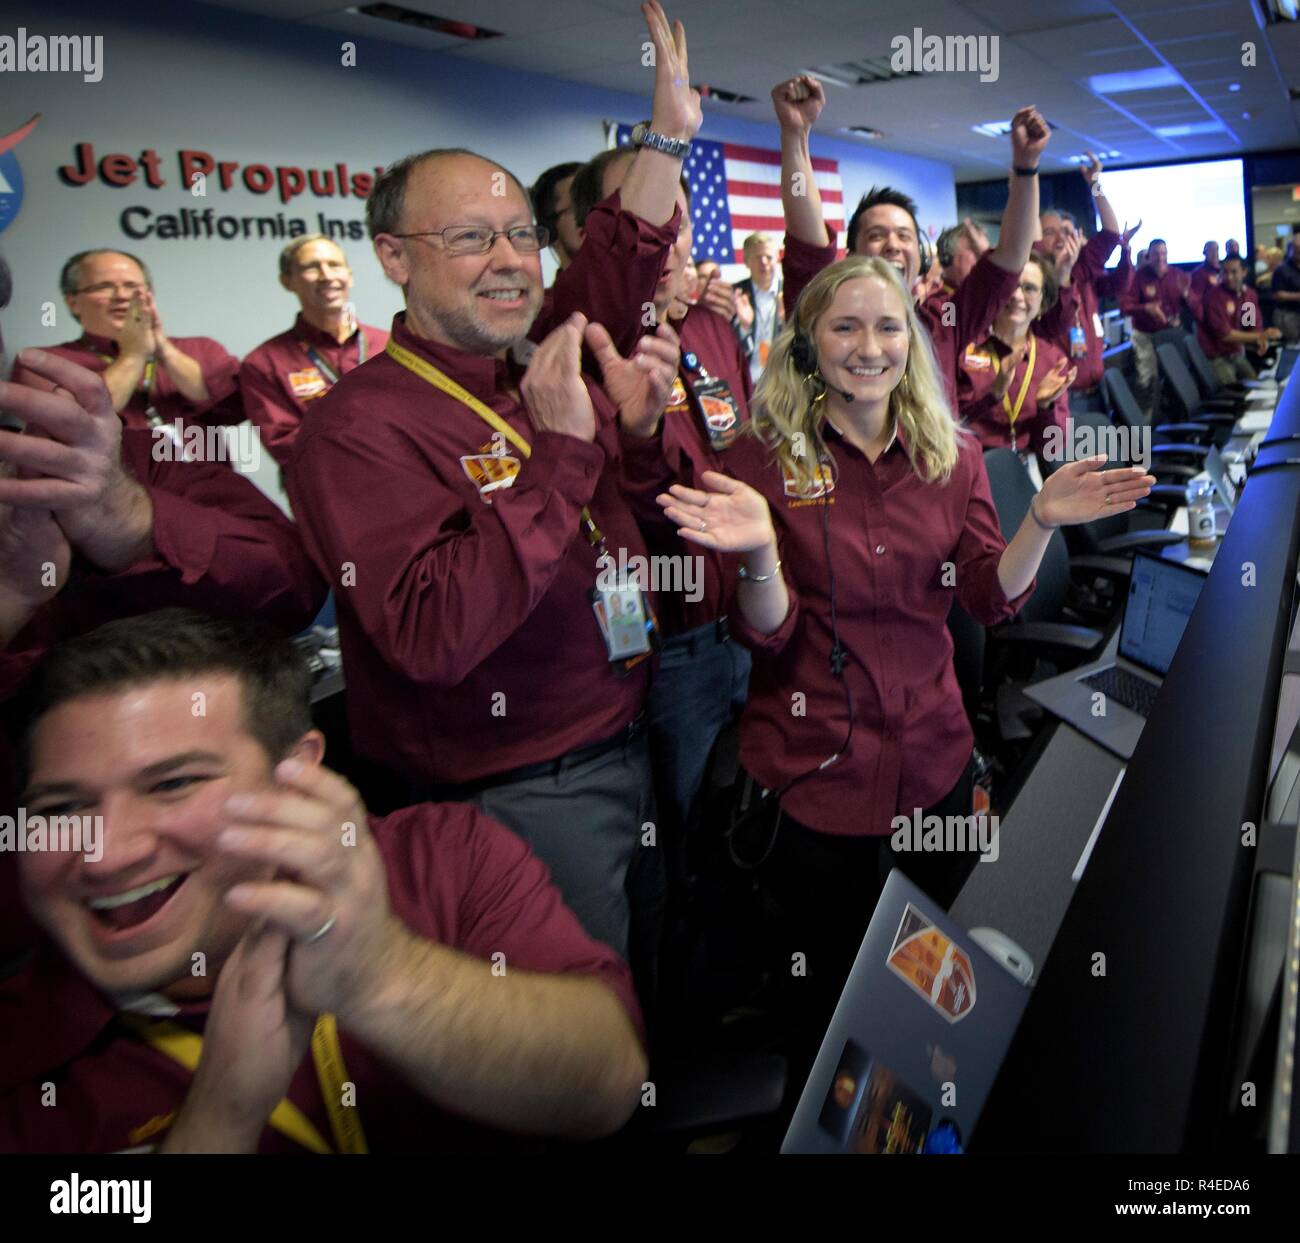 Bruce Banerdt, InSight Principal Investigator, left, Hallie Gengl, Data Visualization Developer, and other team members react after receiving confirmation that the Mars InSight lander successfully touched down on the surface of Mars November 26, 2018 inside the Mission Support Area of the Jet Propulsion Laboratory in Pasadena, California. InSight, short for Interior Exploration using Seismic Investigations, Geodesy and Heat Transport, is a Mars lander designed to study the inner space of Mars. Stock Photo